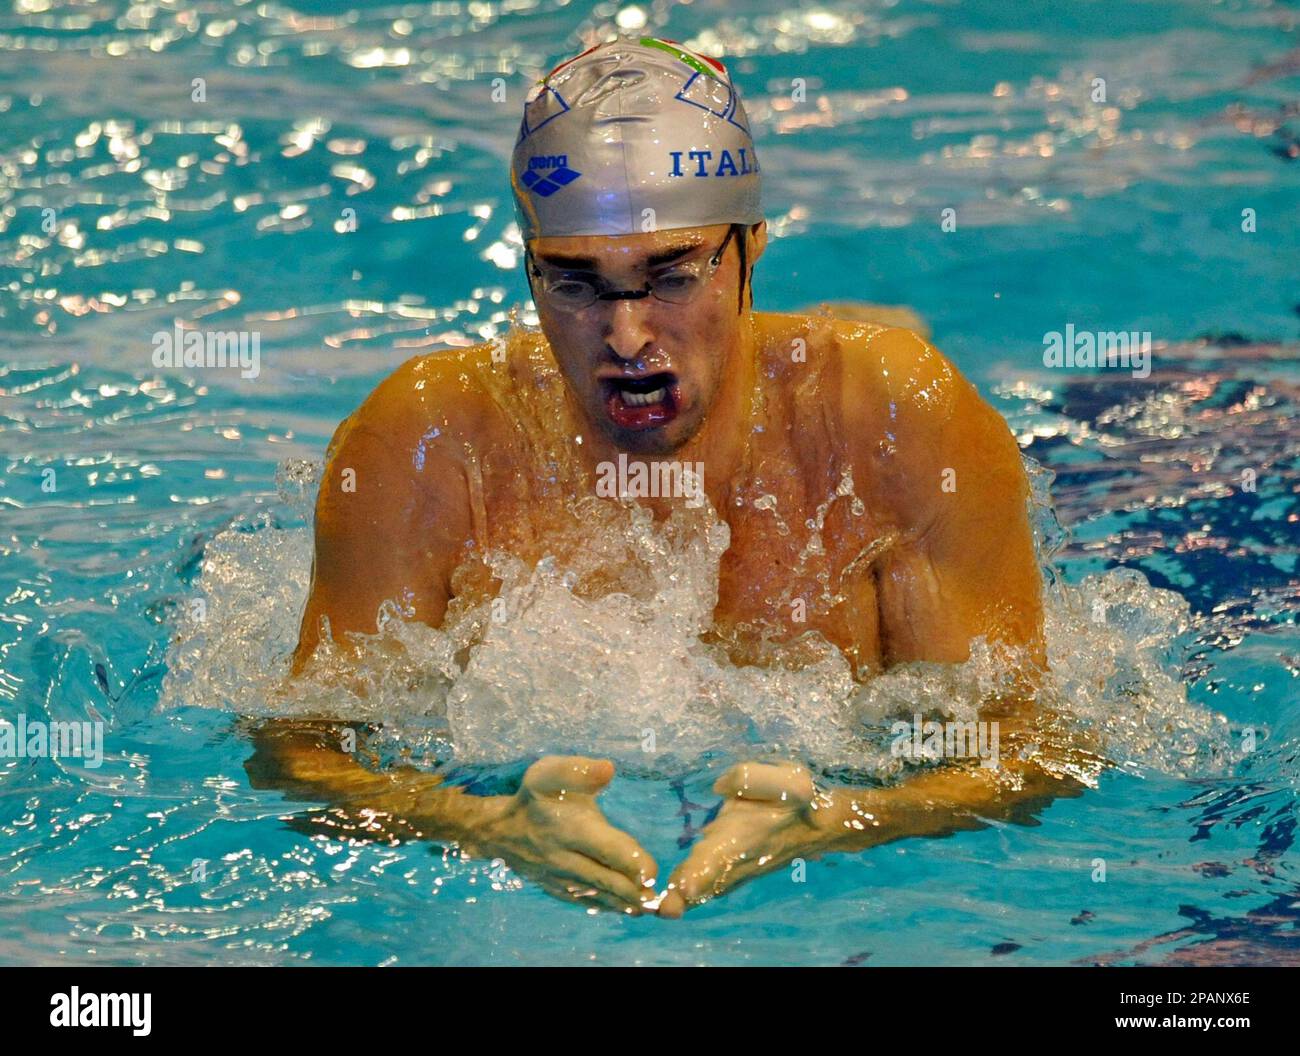 Italy's swimmer Alessio Boggiatto competes during a Men's 400m Individual Medley heat at the European Short Course Swimming Championships in Debrecen, Hungary, Friday, Dec. 14, 2007. (AP Photo/Bela Szandelszky) Stock Photo